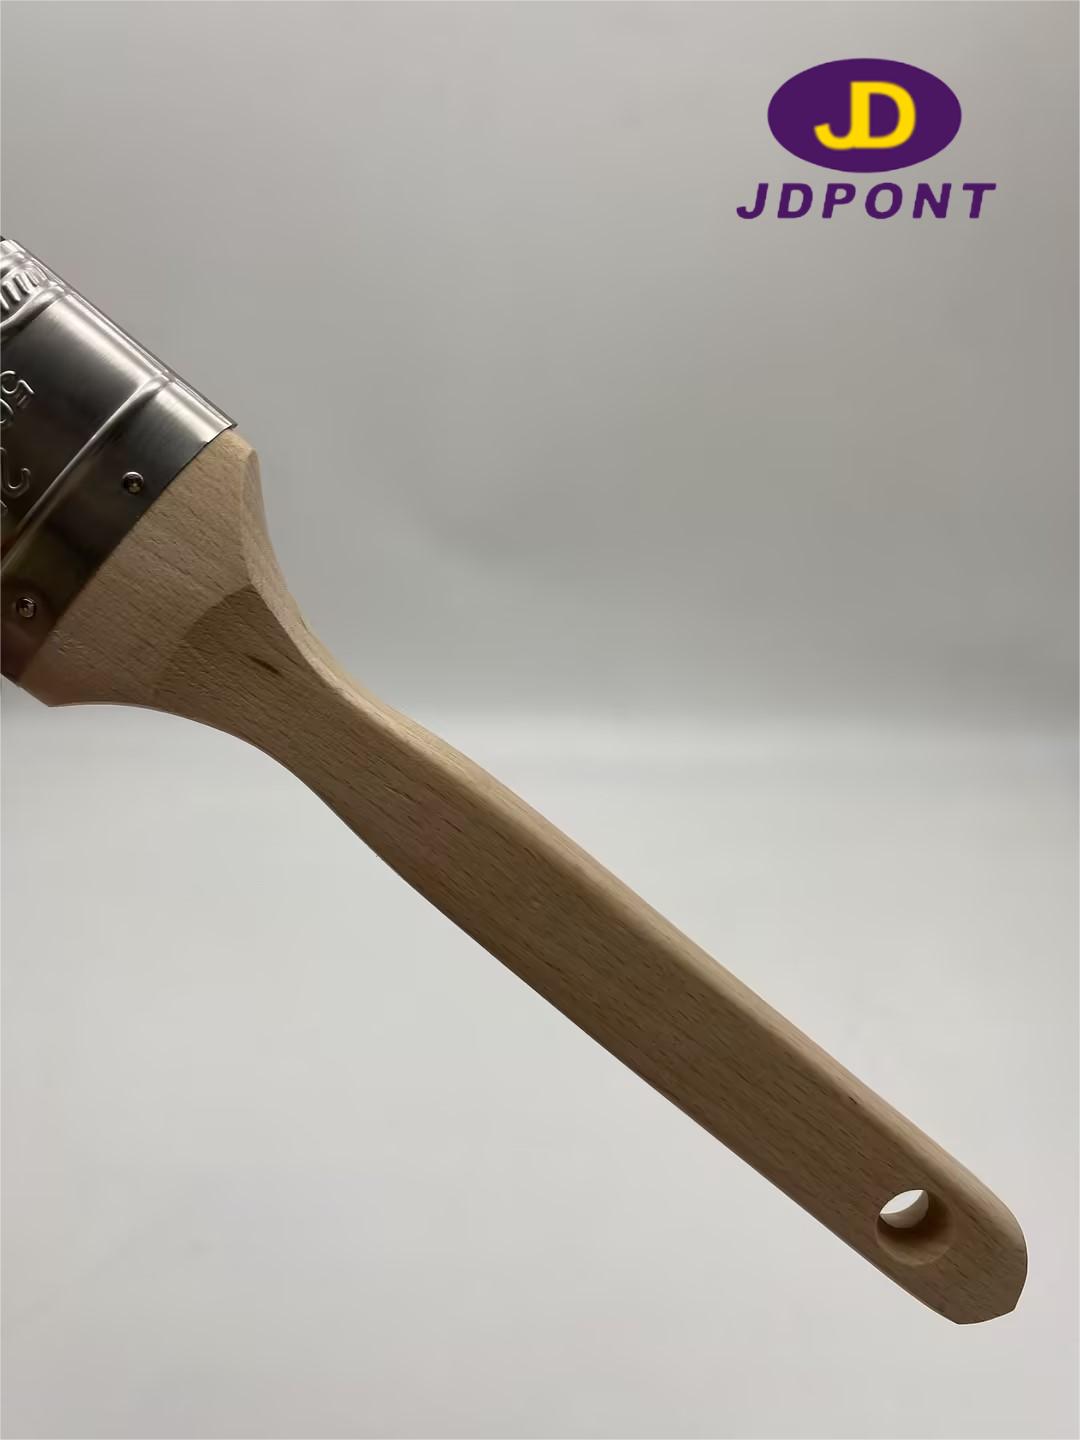 6 PRO-PA JDPBS 2 Wood Handle and 100% Synthetic Filament(Soild Round Tapered) Paint Brush(图4)